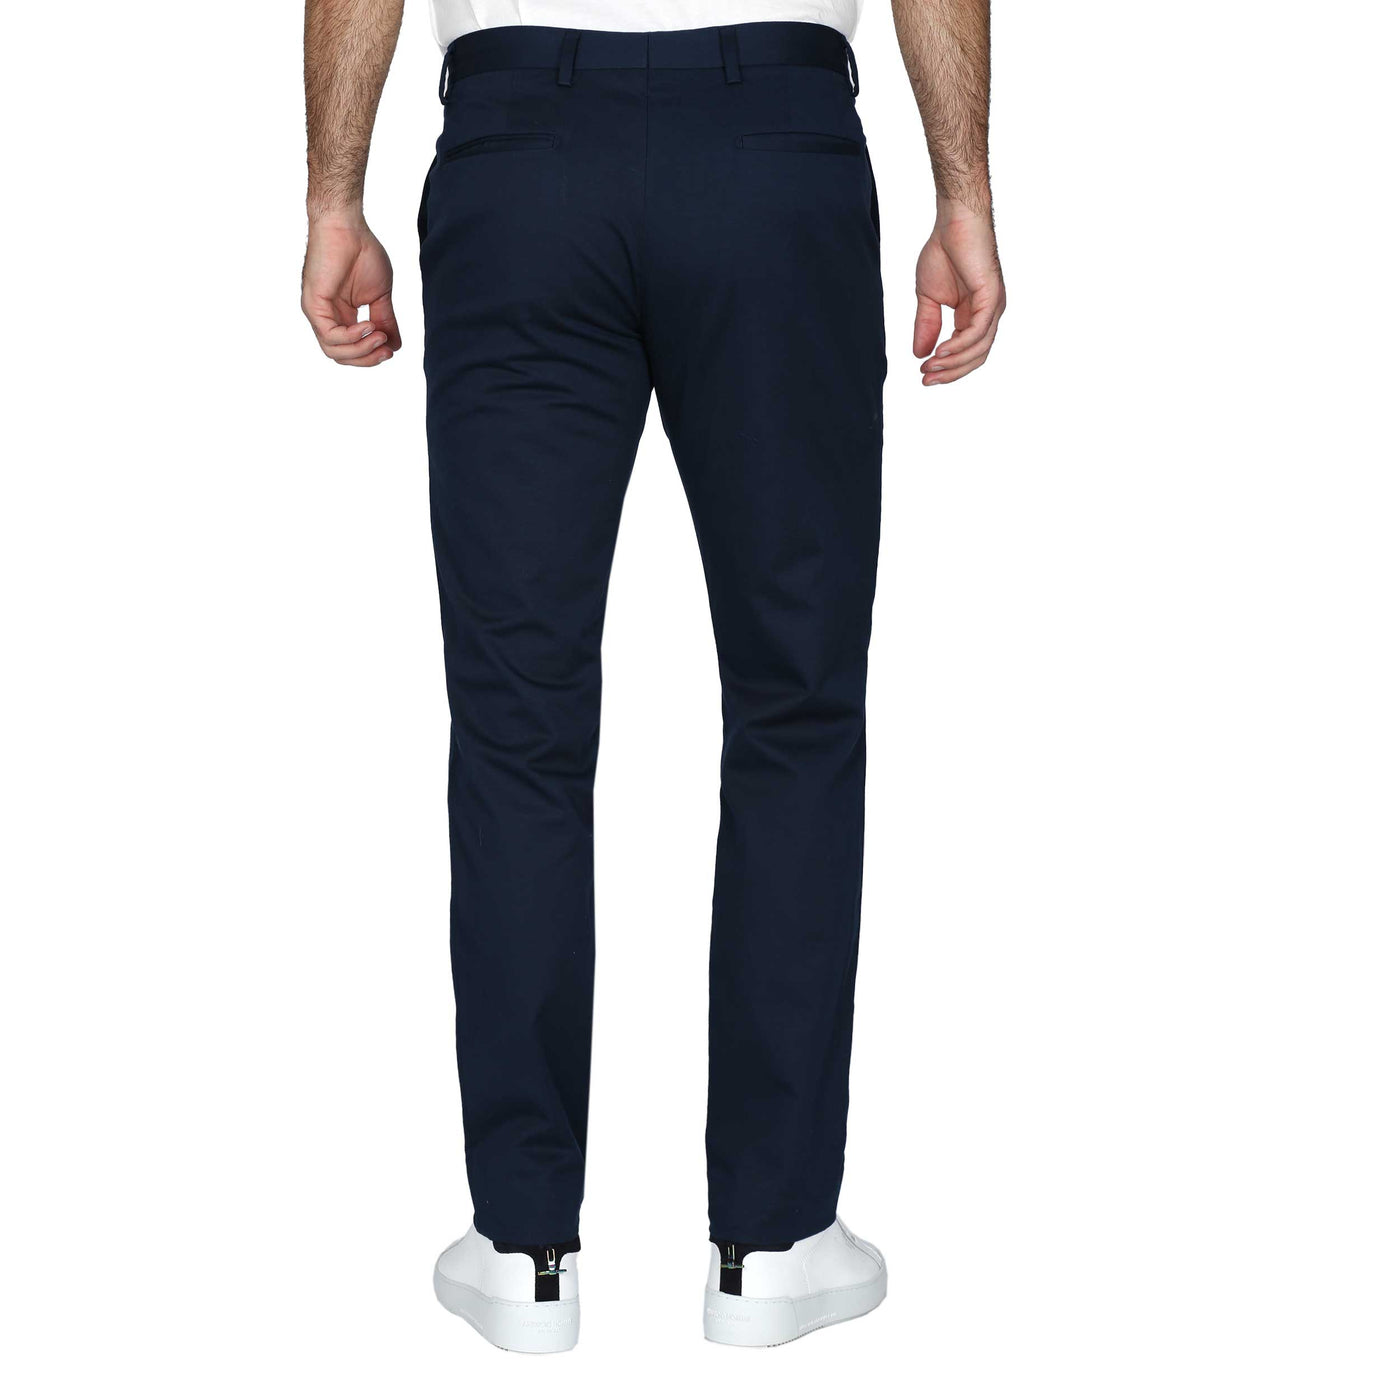 Paul Smith Mid Fit Chino in Dark Navy Back